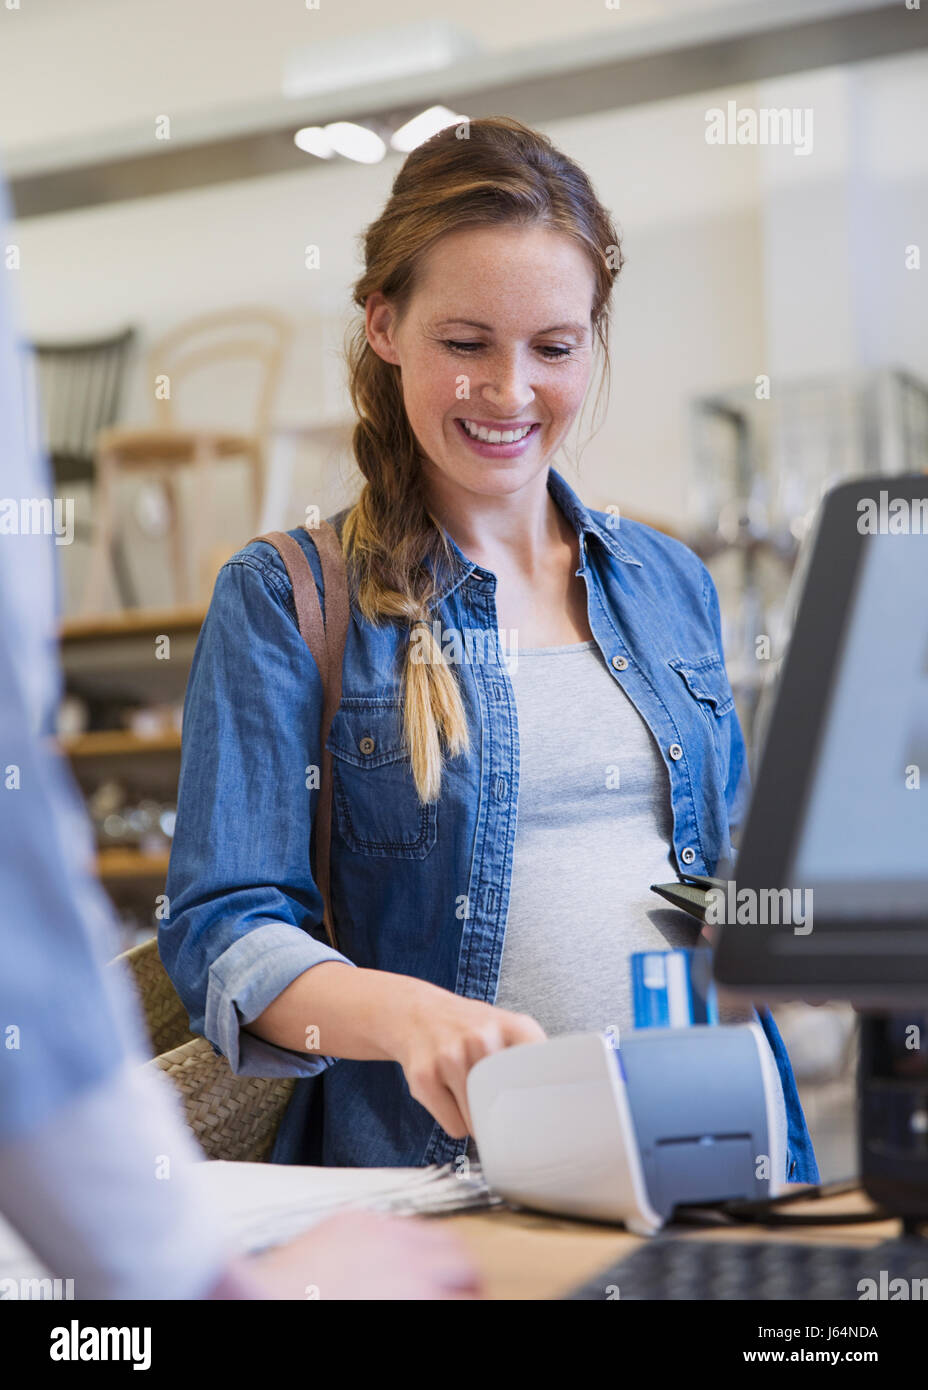 Smiling woman using credit card reader in shop Banque D'Images